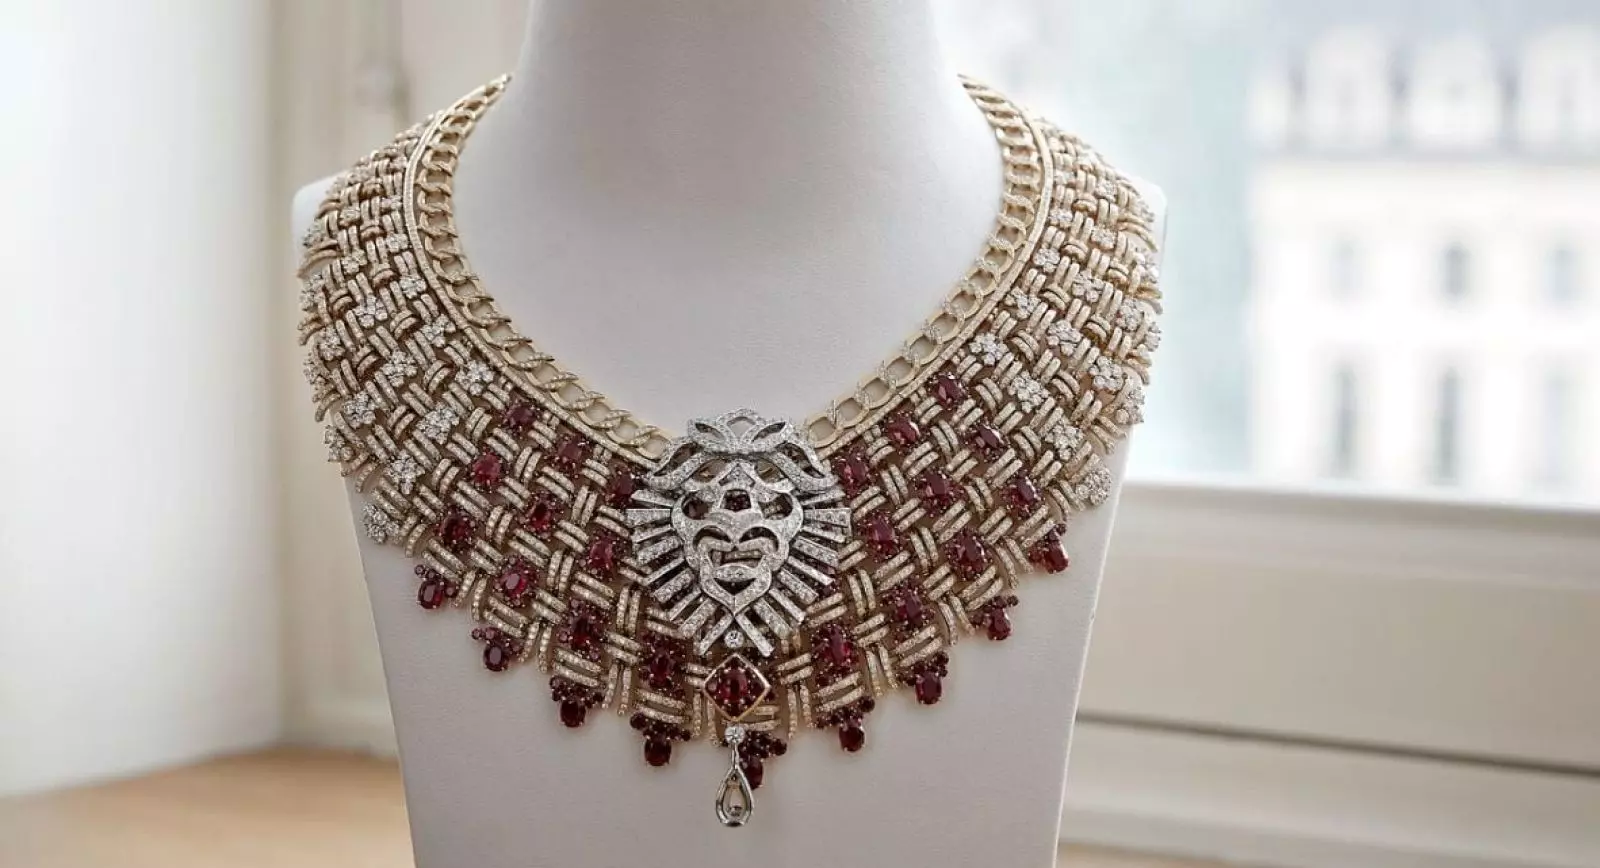 Chanel Tweed Royal plastron necklace with rubies, diamonds, and a 10.17-carat D colour Type IIa pear-shaped diamond drop from the Tweed Lion set of the Tweed de Chanel High Jewellery Collection